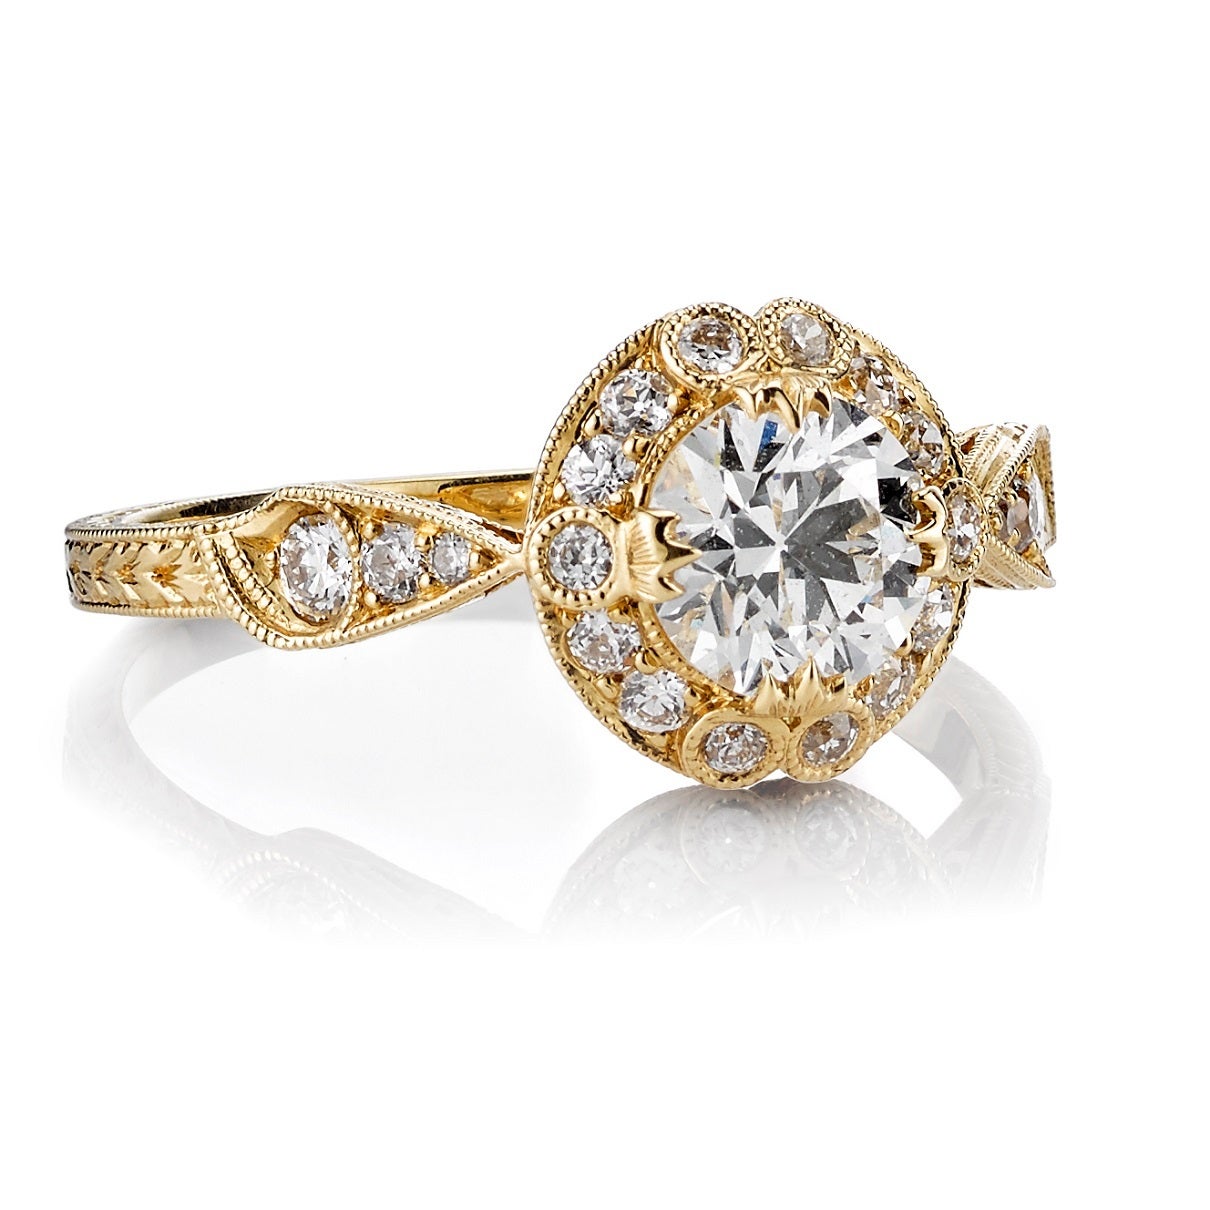 0.72ct F/SI1 EGL certified old European cut diamond set in a handcrafted 18K yellow gold mounting. A classic Edwardian design that features a feminine halo, hand engraving and filigree.